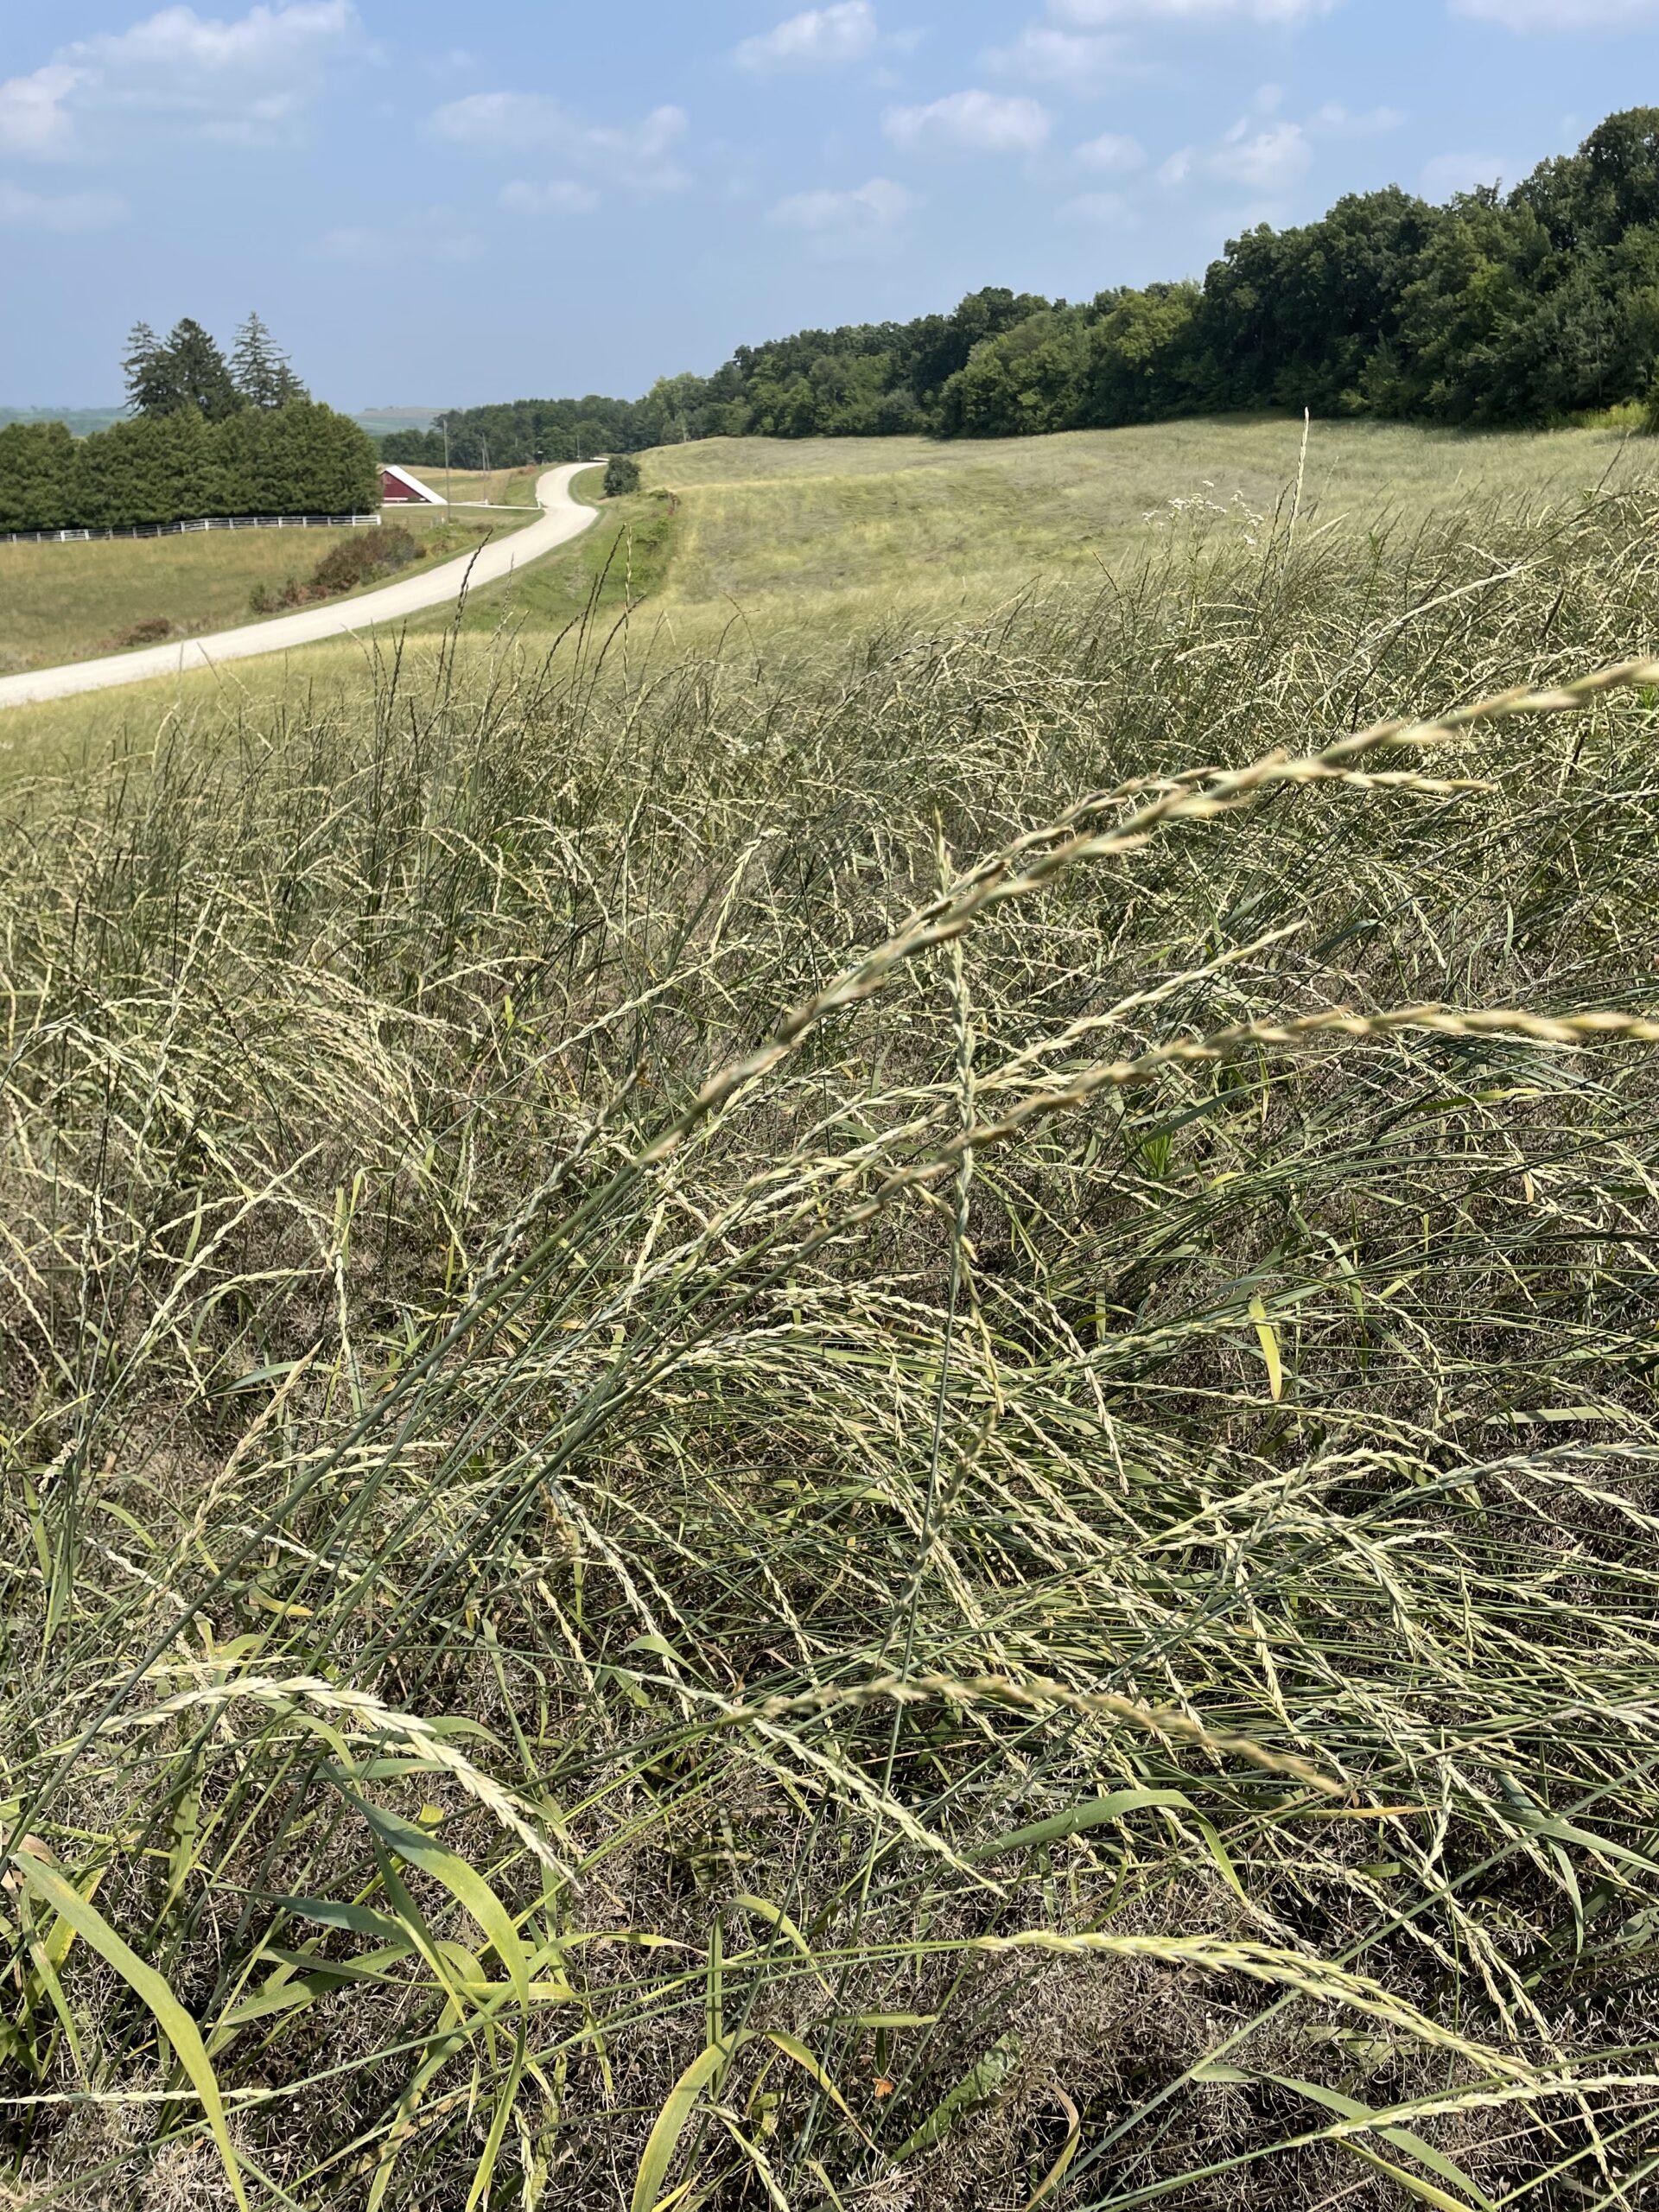 The Allamakee SWCD was recently awarded a 3-year grant from the Iowa Department of Agriculture and Land Stewardship (IDALS) to implement and promote adding a perennial grain, known as Kernza, […]